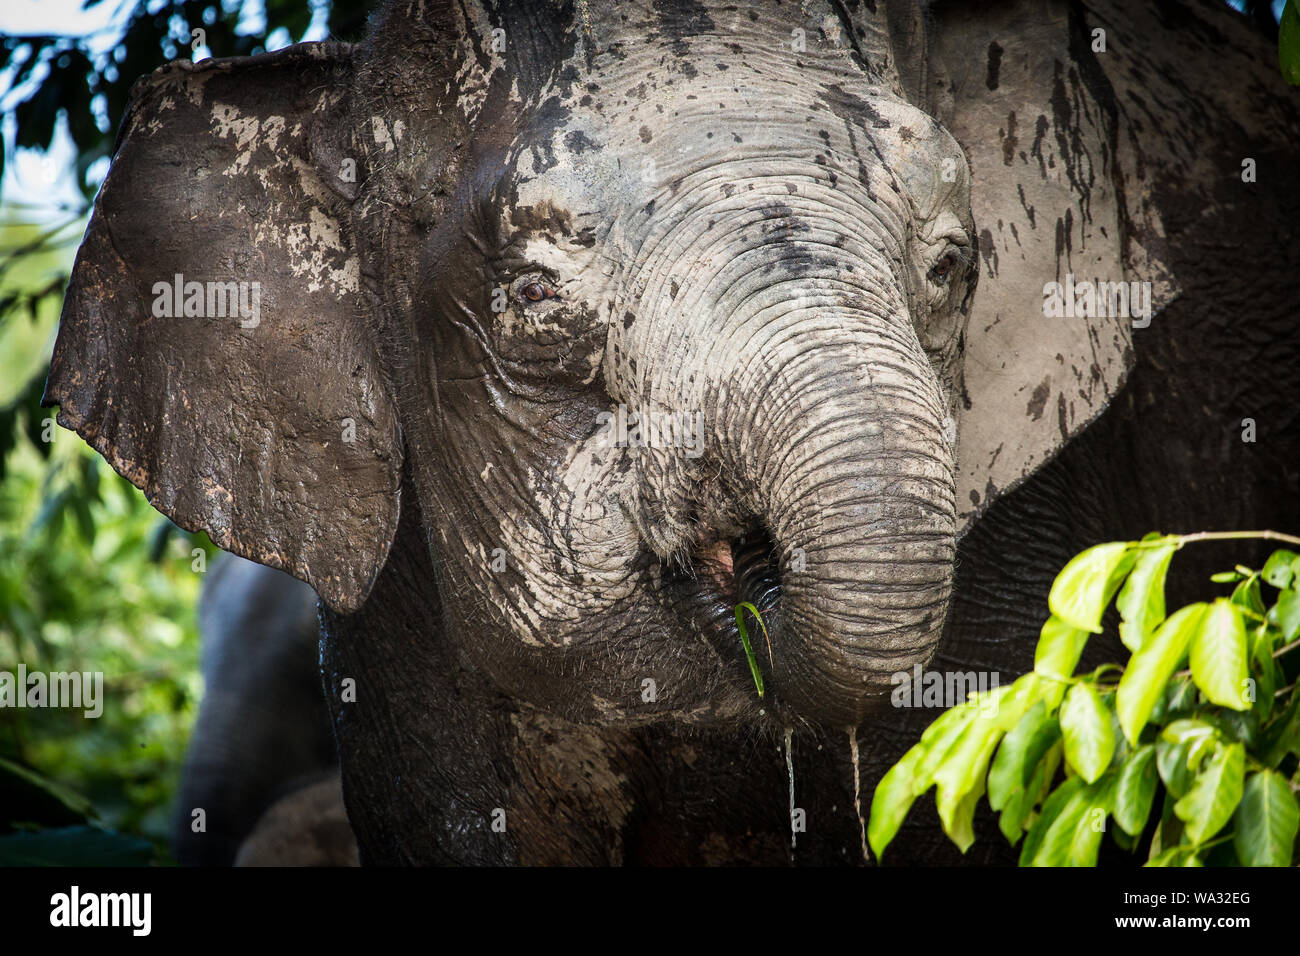 An adult pygmy elephant bathes in the mud of the Kinabatangan river, in Sabah, Borneo Stock Photo